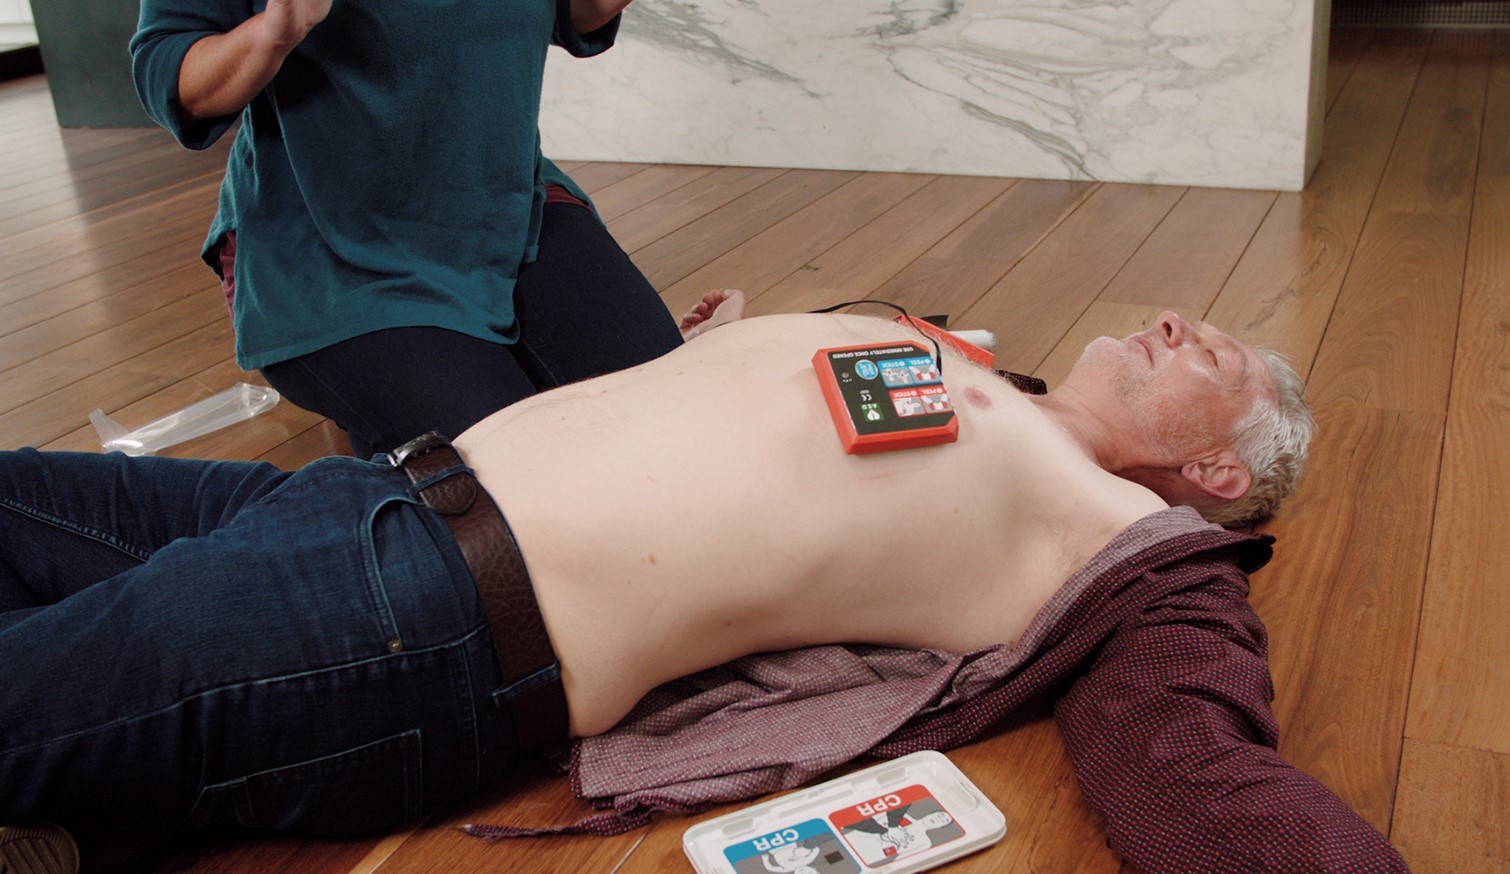 As part of CellAED’s CE Certification allowing it to be sold in the EU, it needed to secure RED accreditation. It is now the only AED in the world approved as a cellular-connected medical device.